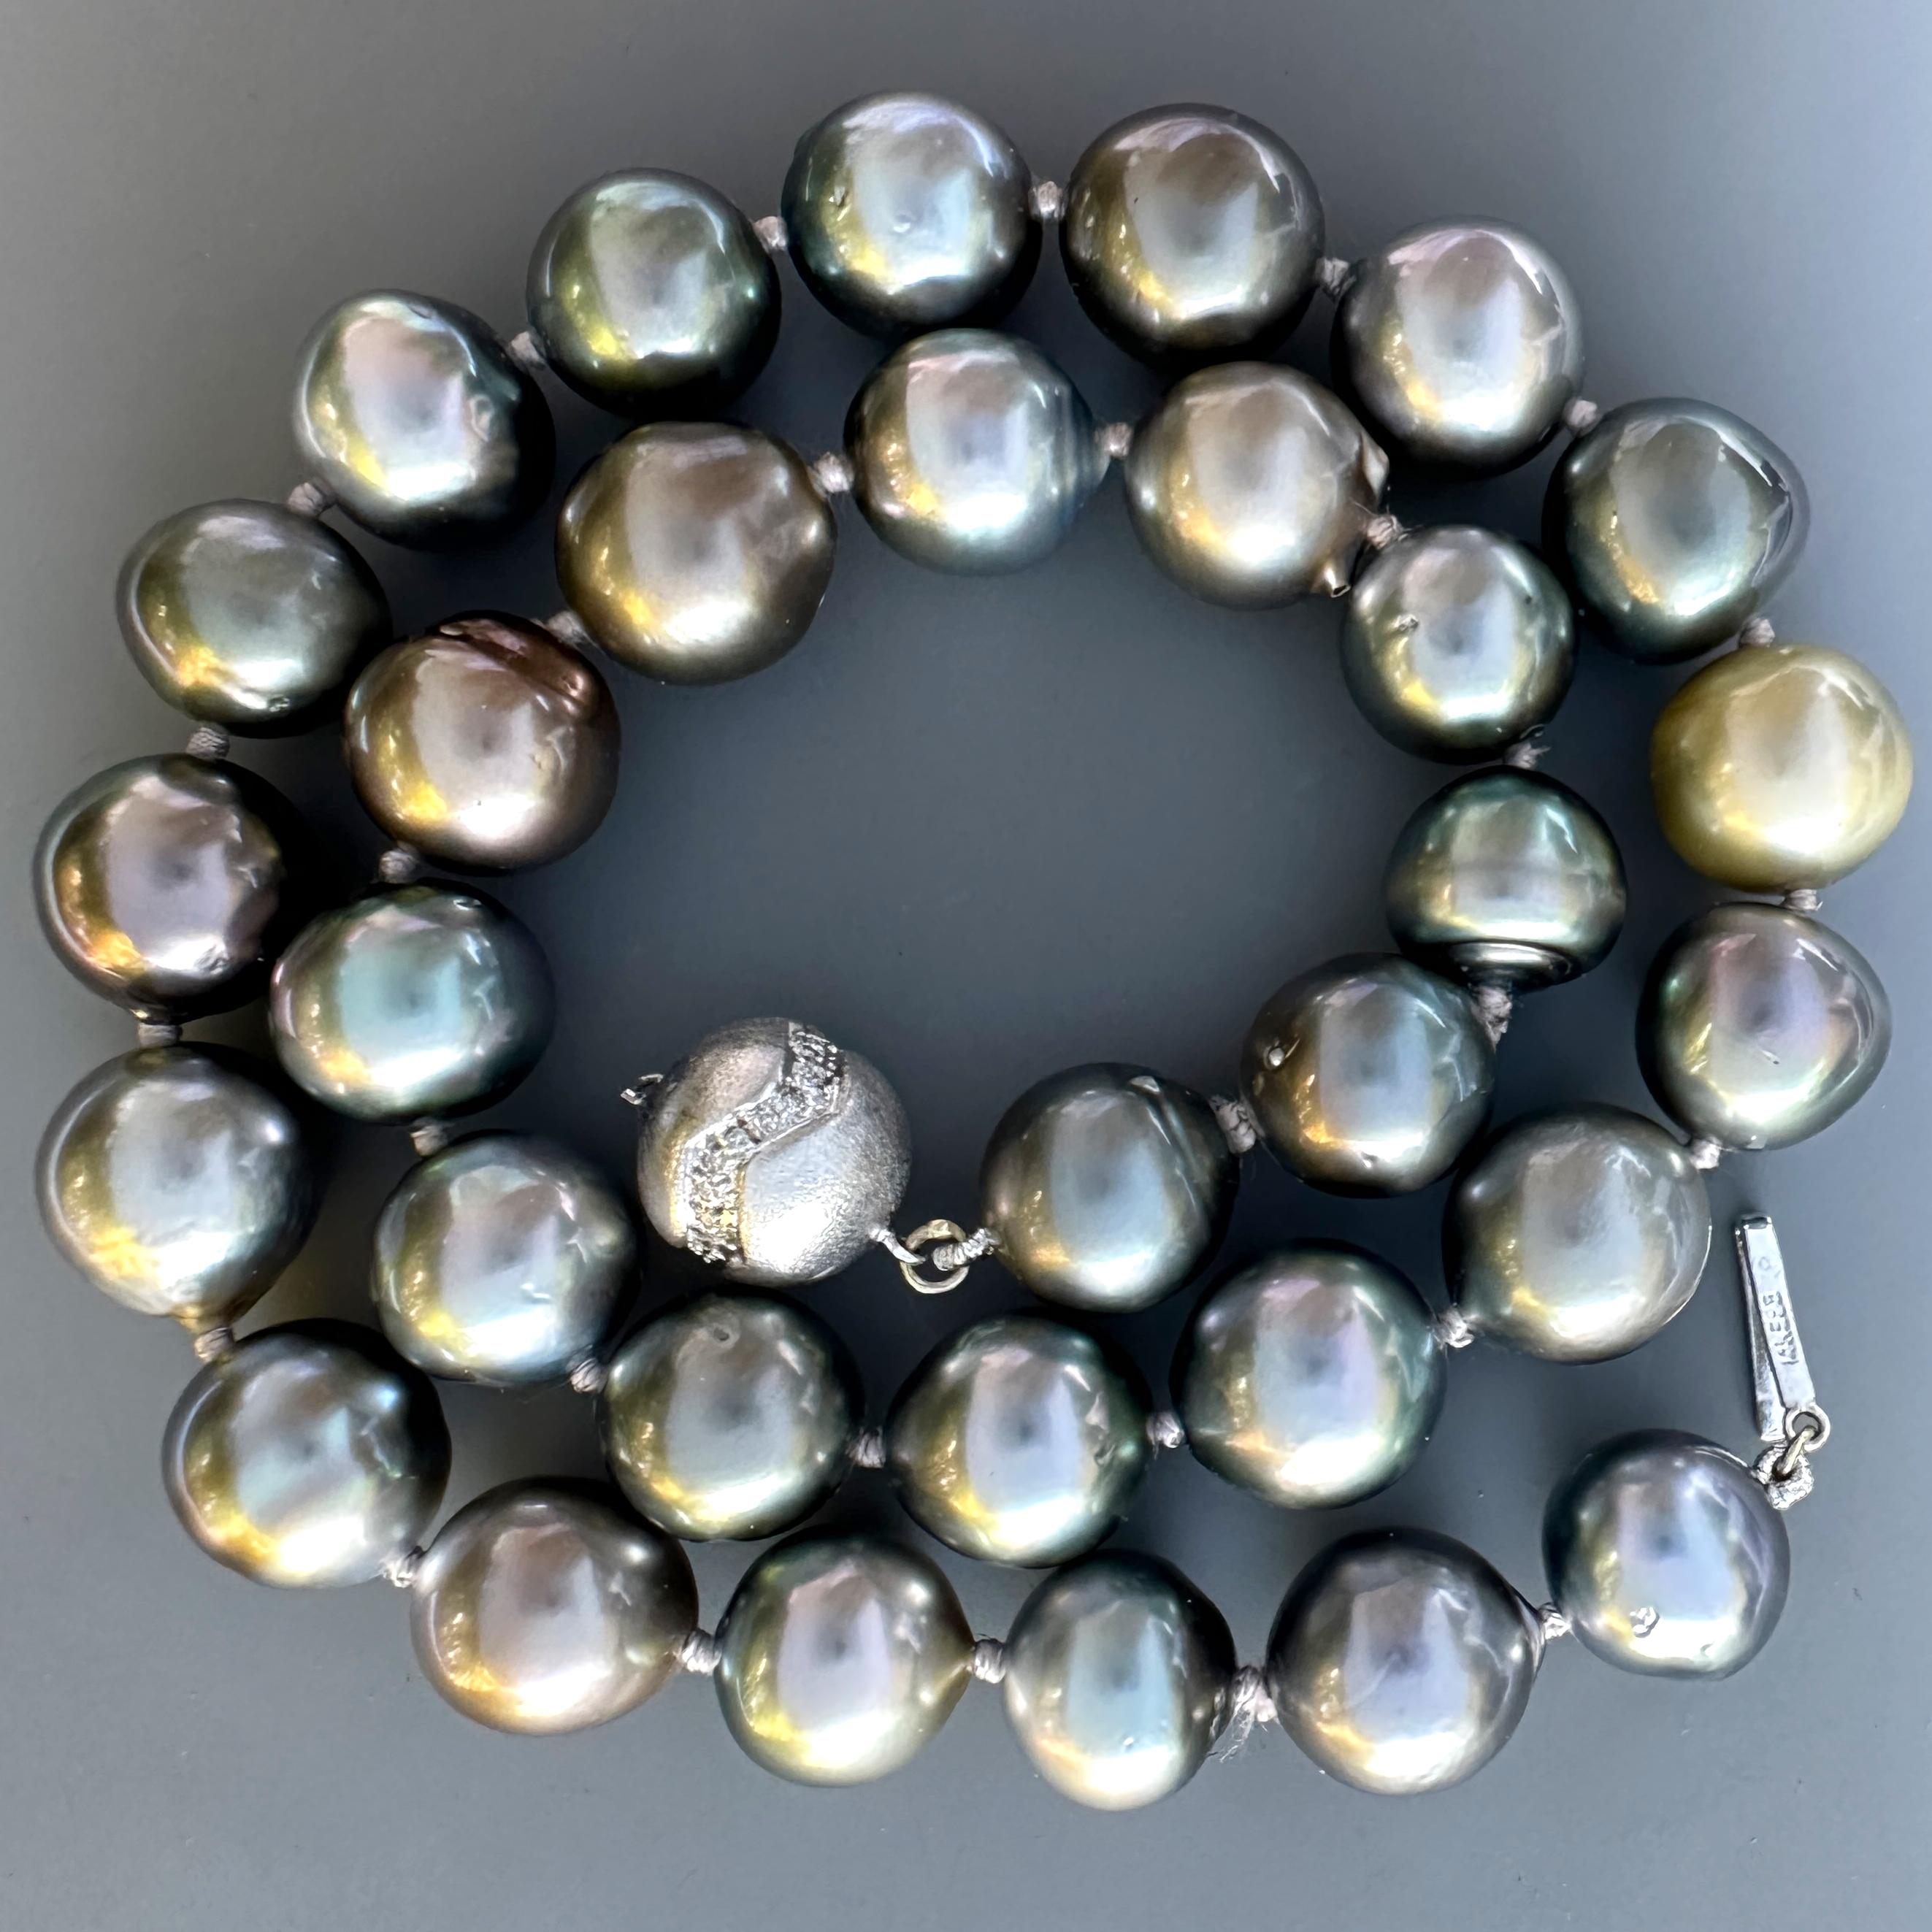 Choker-Length Strand of 11.5mm Tahitian Pearls w White Gold & Diamond Ball Clasp For Sale 7